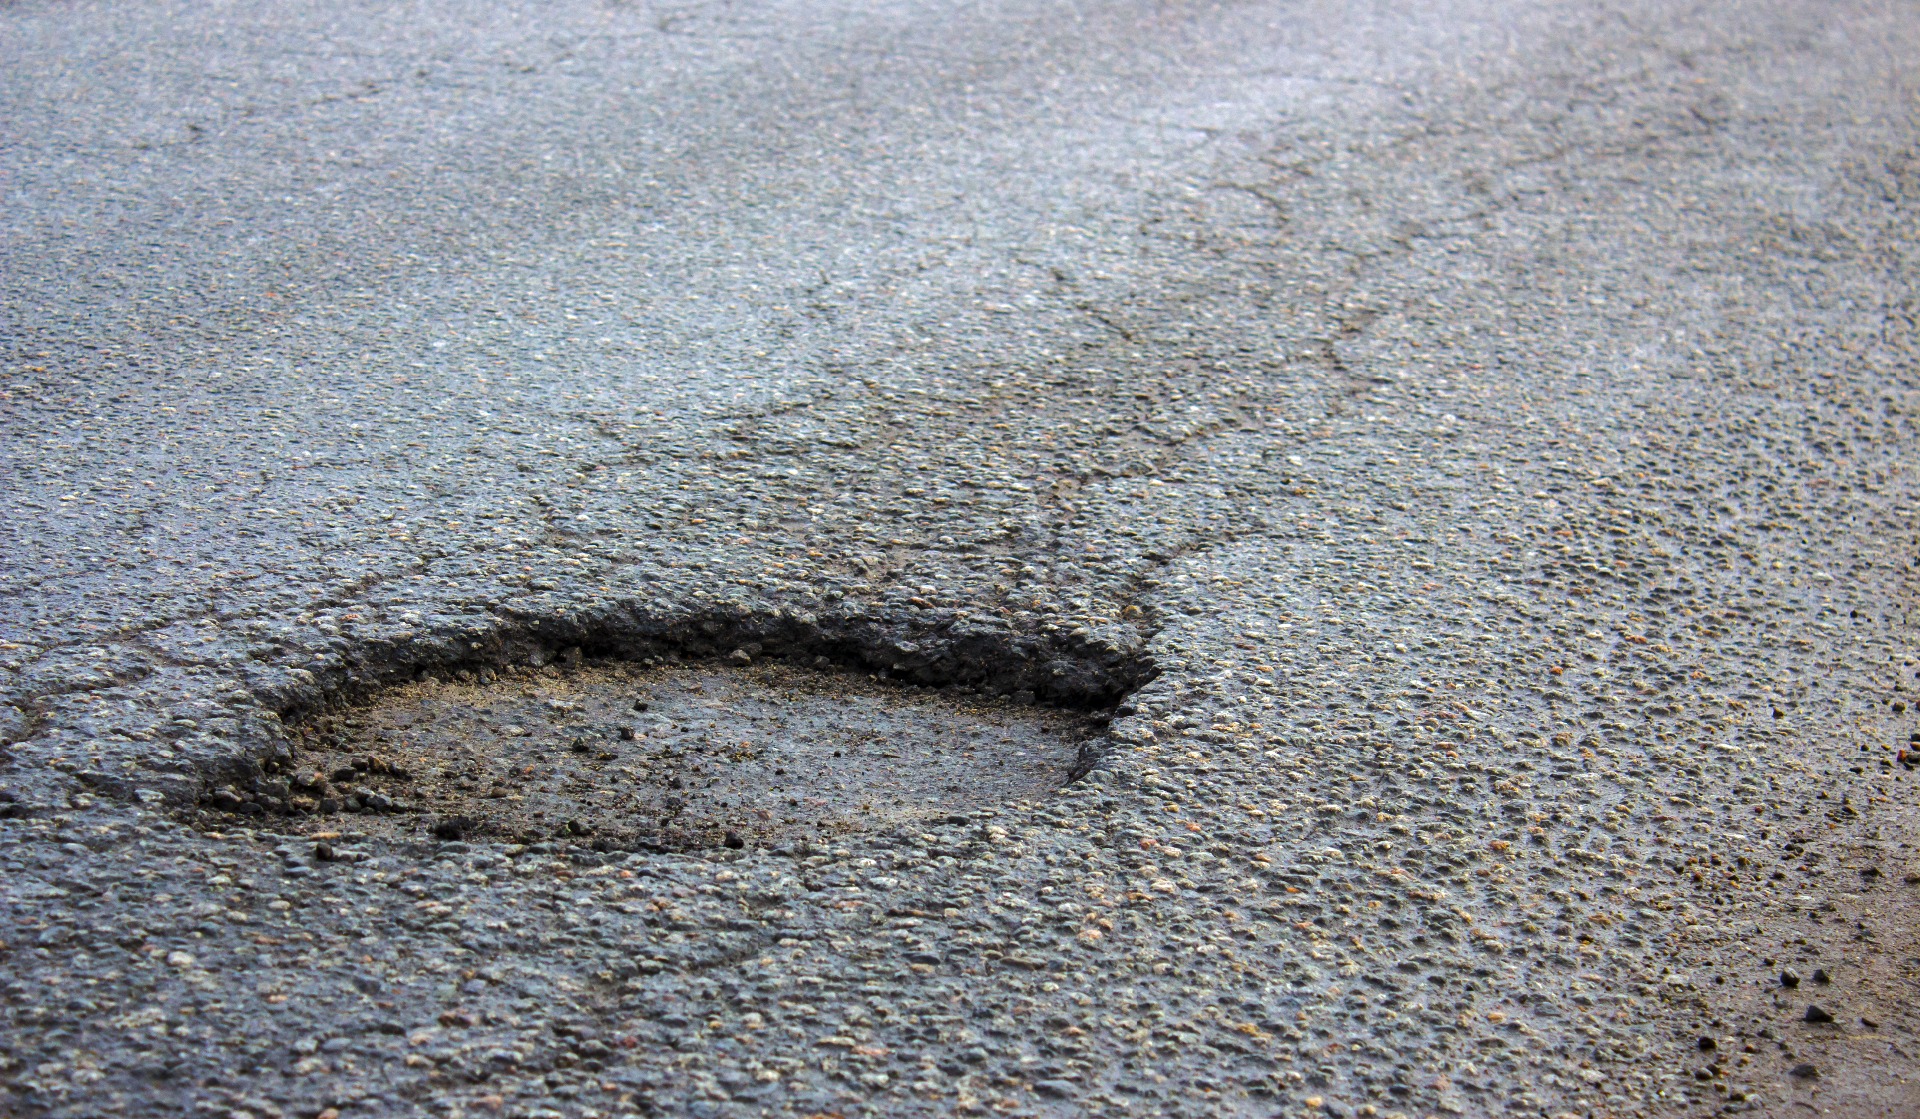 A large pothole in the middle of a road; our No Win No Fee Personal Injury solicitors can help you make an injury compensation claim for the injuries you suffer due to damaged roads.